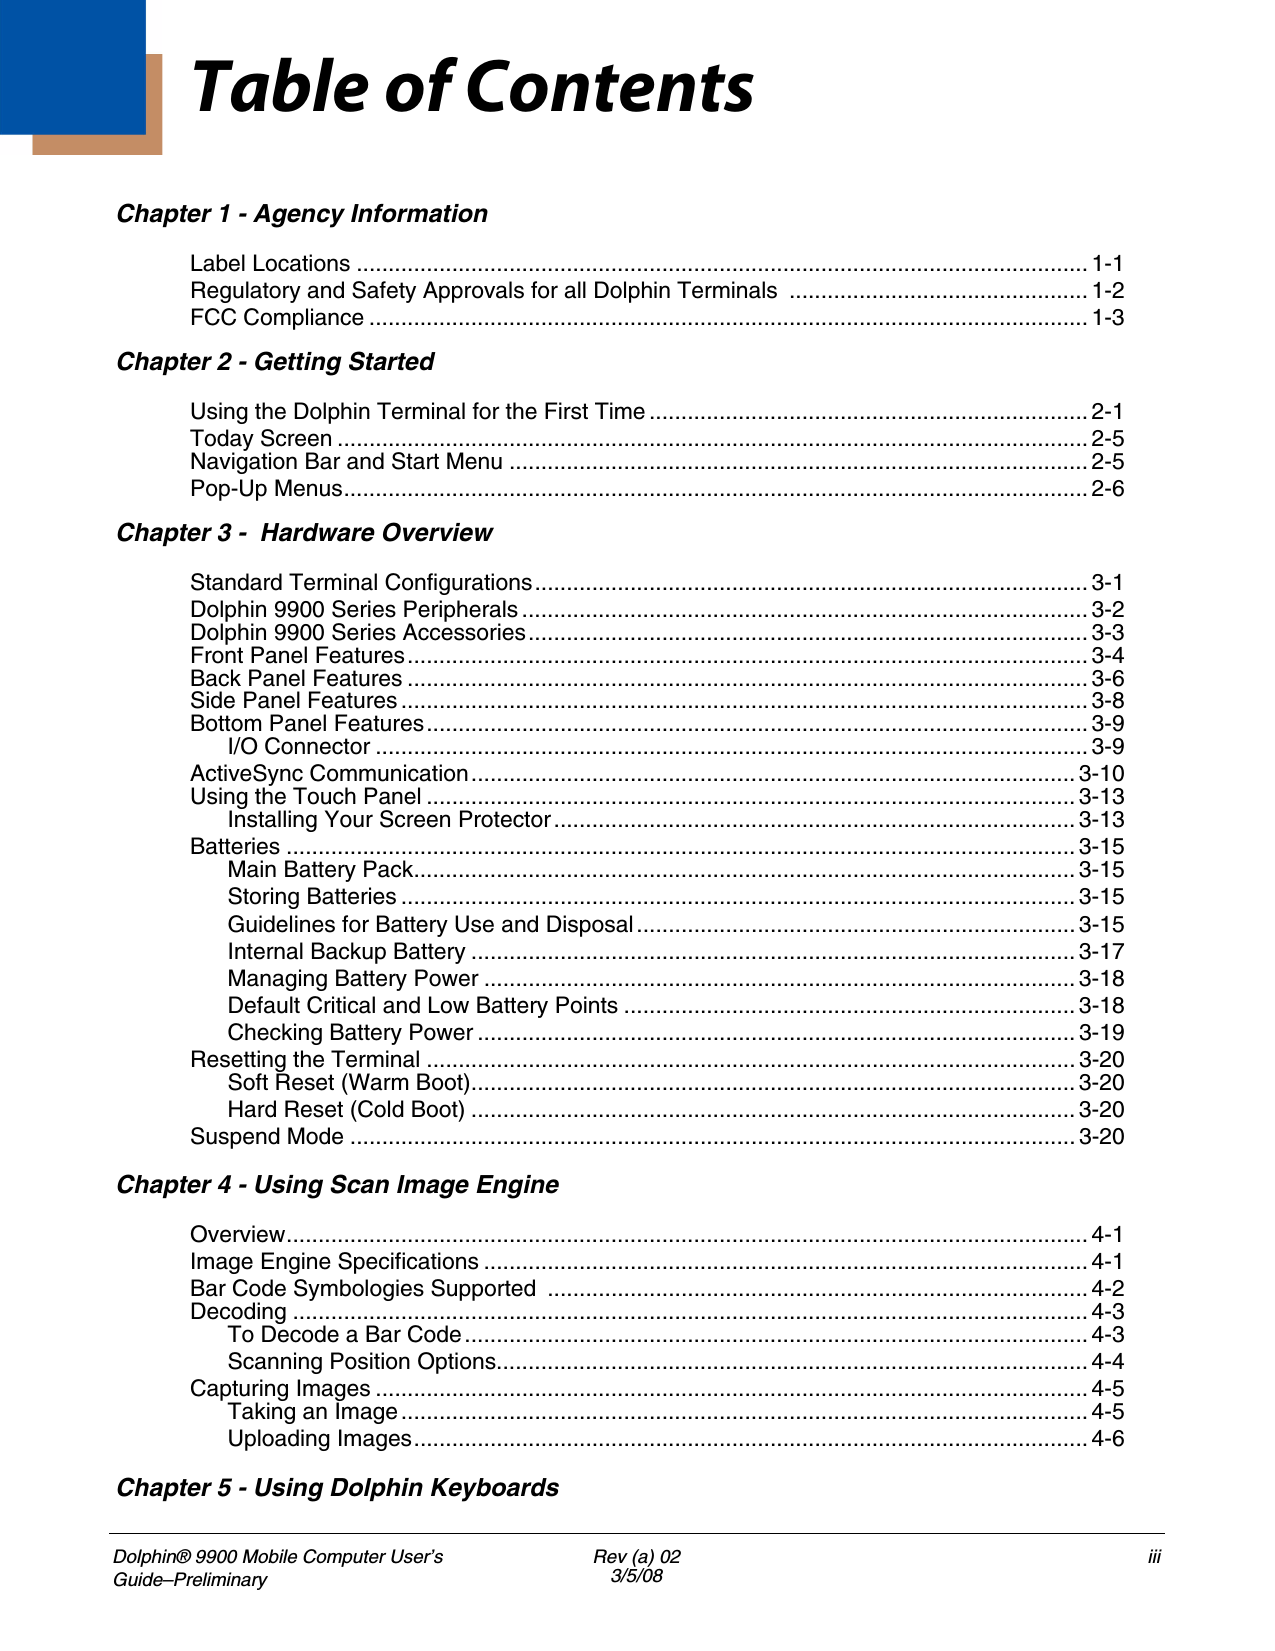 Dolphin® 9900 Mobile Computer User’s Guide–PreliminaryRev (a) 023/5/08iiiChapter 1 - Agency InformationLabel Locations ................................................................................................................... 1-1Regulatory and Safety Approvals for all Dolphin Terminals ............................................... 1-2FCC Compliance ................................................................................................................. 1-3Chapter 2 - Getting StartedUsing the Dolphin Terminal for the First Time ..................................................................... 2-1Today Screen ...................................................................................................................... 2-5Navigation Bar and Start Menu ........................................................................................... 2-5Pop-Up Menus..................................................................................................................... 2-6Chapter 3 -  Hardware OverviewStandard Terminal Configurations....................................................................................... 3-1Dolphin 9900 Series Peripherals ......................................................................................... 3-2Dolphin 9900 Series Accessories........................................................................................ 3-3Front Panel Features........................................................................................................... 3-4Back Panel Features ........................................................................................................... 3-6Side Panel Features ............................................................................................................ 3-8Bottom Panel Features........................................................................................................ 3-9I/O Connector ................................................................................................................ 3-9ActiveSync Communication............................................................................................... 3-10Using the Touch Panel ...................................................................................................... 3-13Installing Your Screen Protector.................................................................................. 3-13Batteries ............................................................................................................................ 3-15Main Battery Pack........................................................................................................ 3-15Storing Batteries .......................................................................................................... 3-15Guidelines for Battery Use and Disposal..................................................................... 3-15Internal Backup Battery ............................................................................................... 3-17Managing Battery Power ............................................................................................. 3-18Default Critical and Low Battery Points ....................................................................... 3-18Checking Battery Power .............................................................................................. 3-19Resetting the Terminal ...................................................................................................... 3-20Soft Reset (Warm Boot)............................................................................................... 3-20Hard Reset (Cold Boot) ............................................................................................... 3-20Suspend Mode .................................................................................................................. 3-20Chapter 4 - Using Scan Image EngineOverview.............................................................................................................................. 4-1Image Engine Specifications ............................................................................................... 4-1Bar Code Symbologies Supported  ..................................................................................... 4-2Decoding ............................................................................................................................. 4-3To Decode a Bar Code.................................................................................................. 4-3Scanning Position Options............................................................................................. 4-4Capturing Images ................................................................................................................4-5Taking an Image............................................................................................................ 4-5Uploading Images.......................................................................................................... 4-6Chapter 5 - Using Dolphin KeyboardsTable of Contents